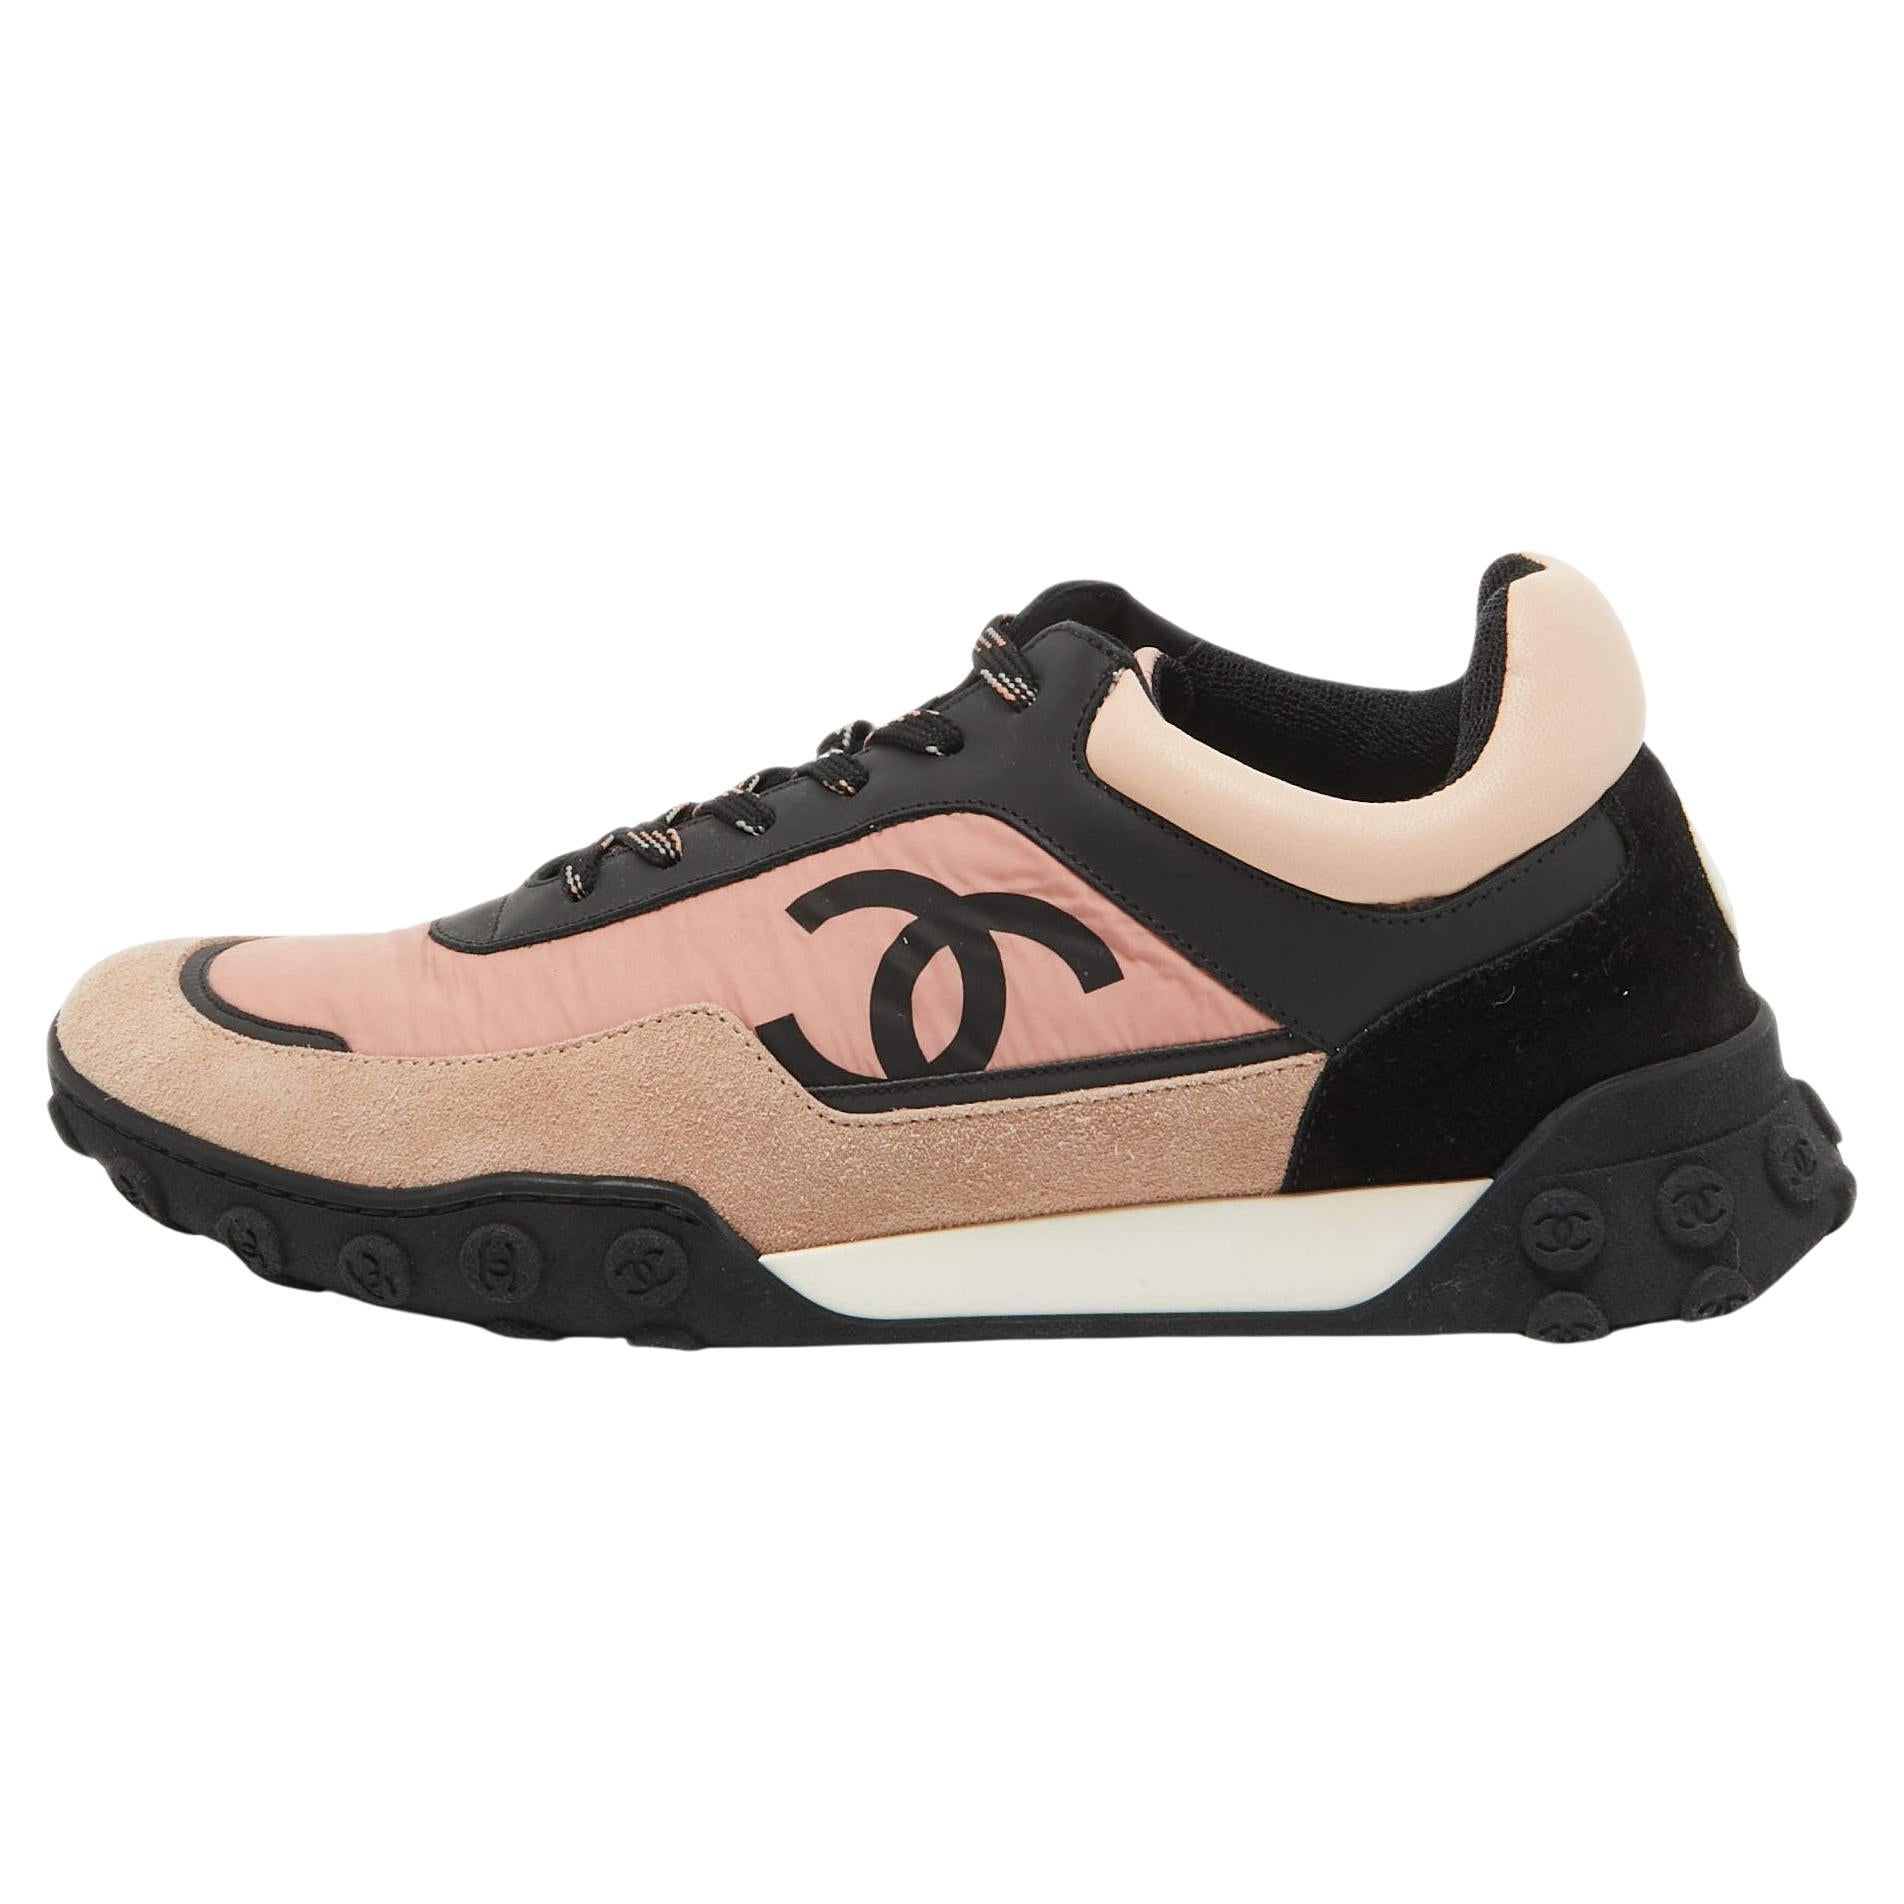 Chanel Multicolor Nylon And Suede Logo Low Top Sneakers Size 40.5 For Sale